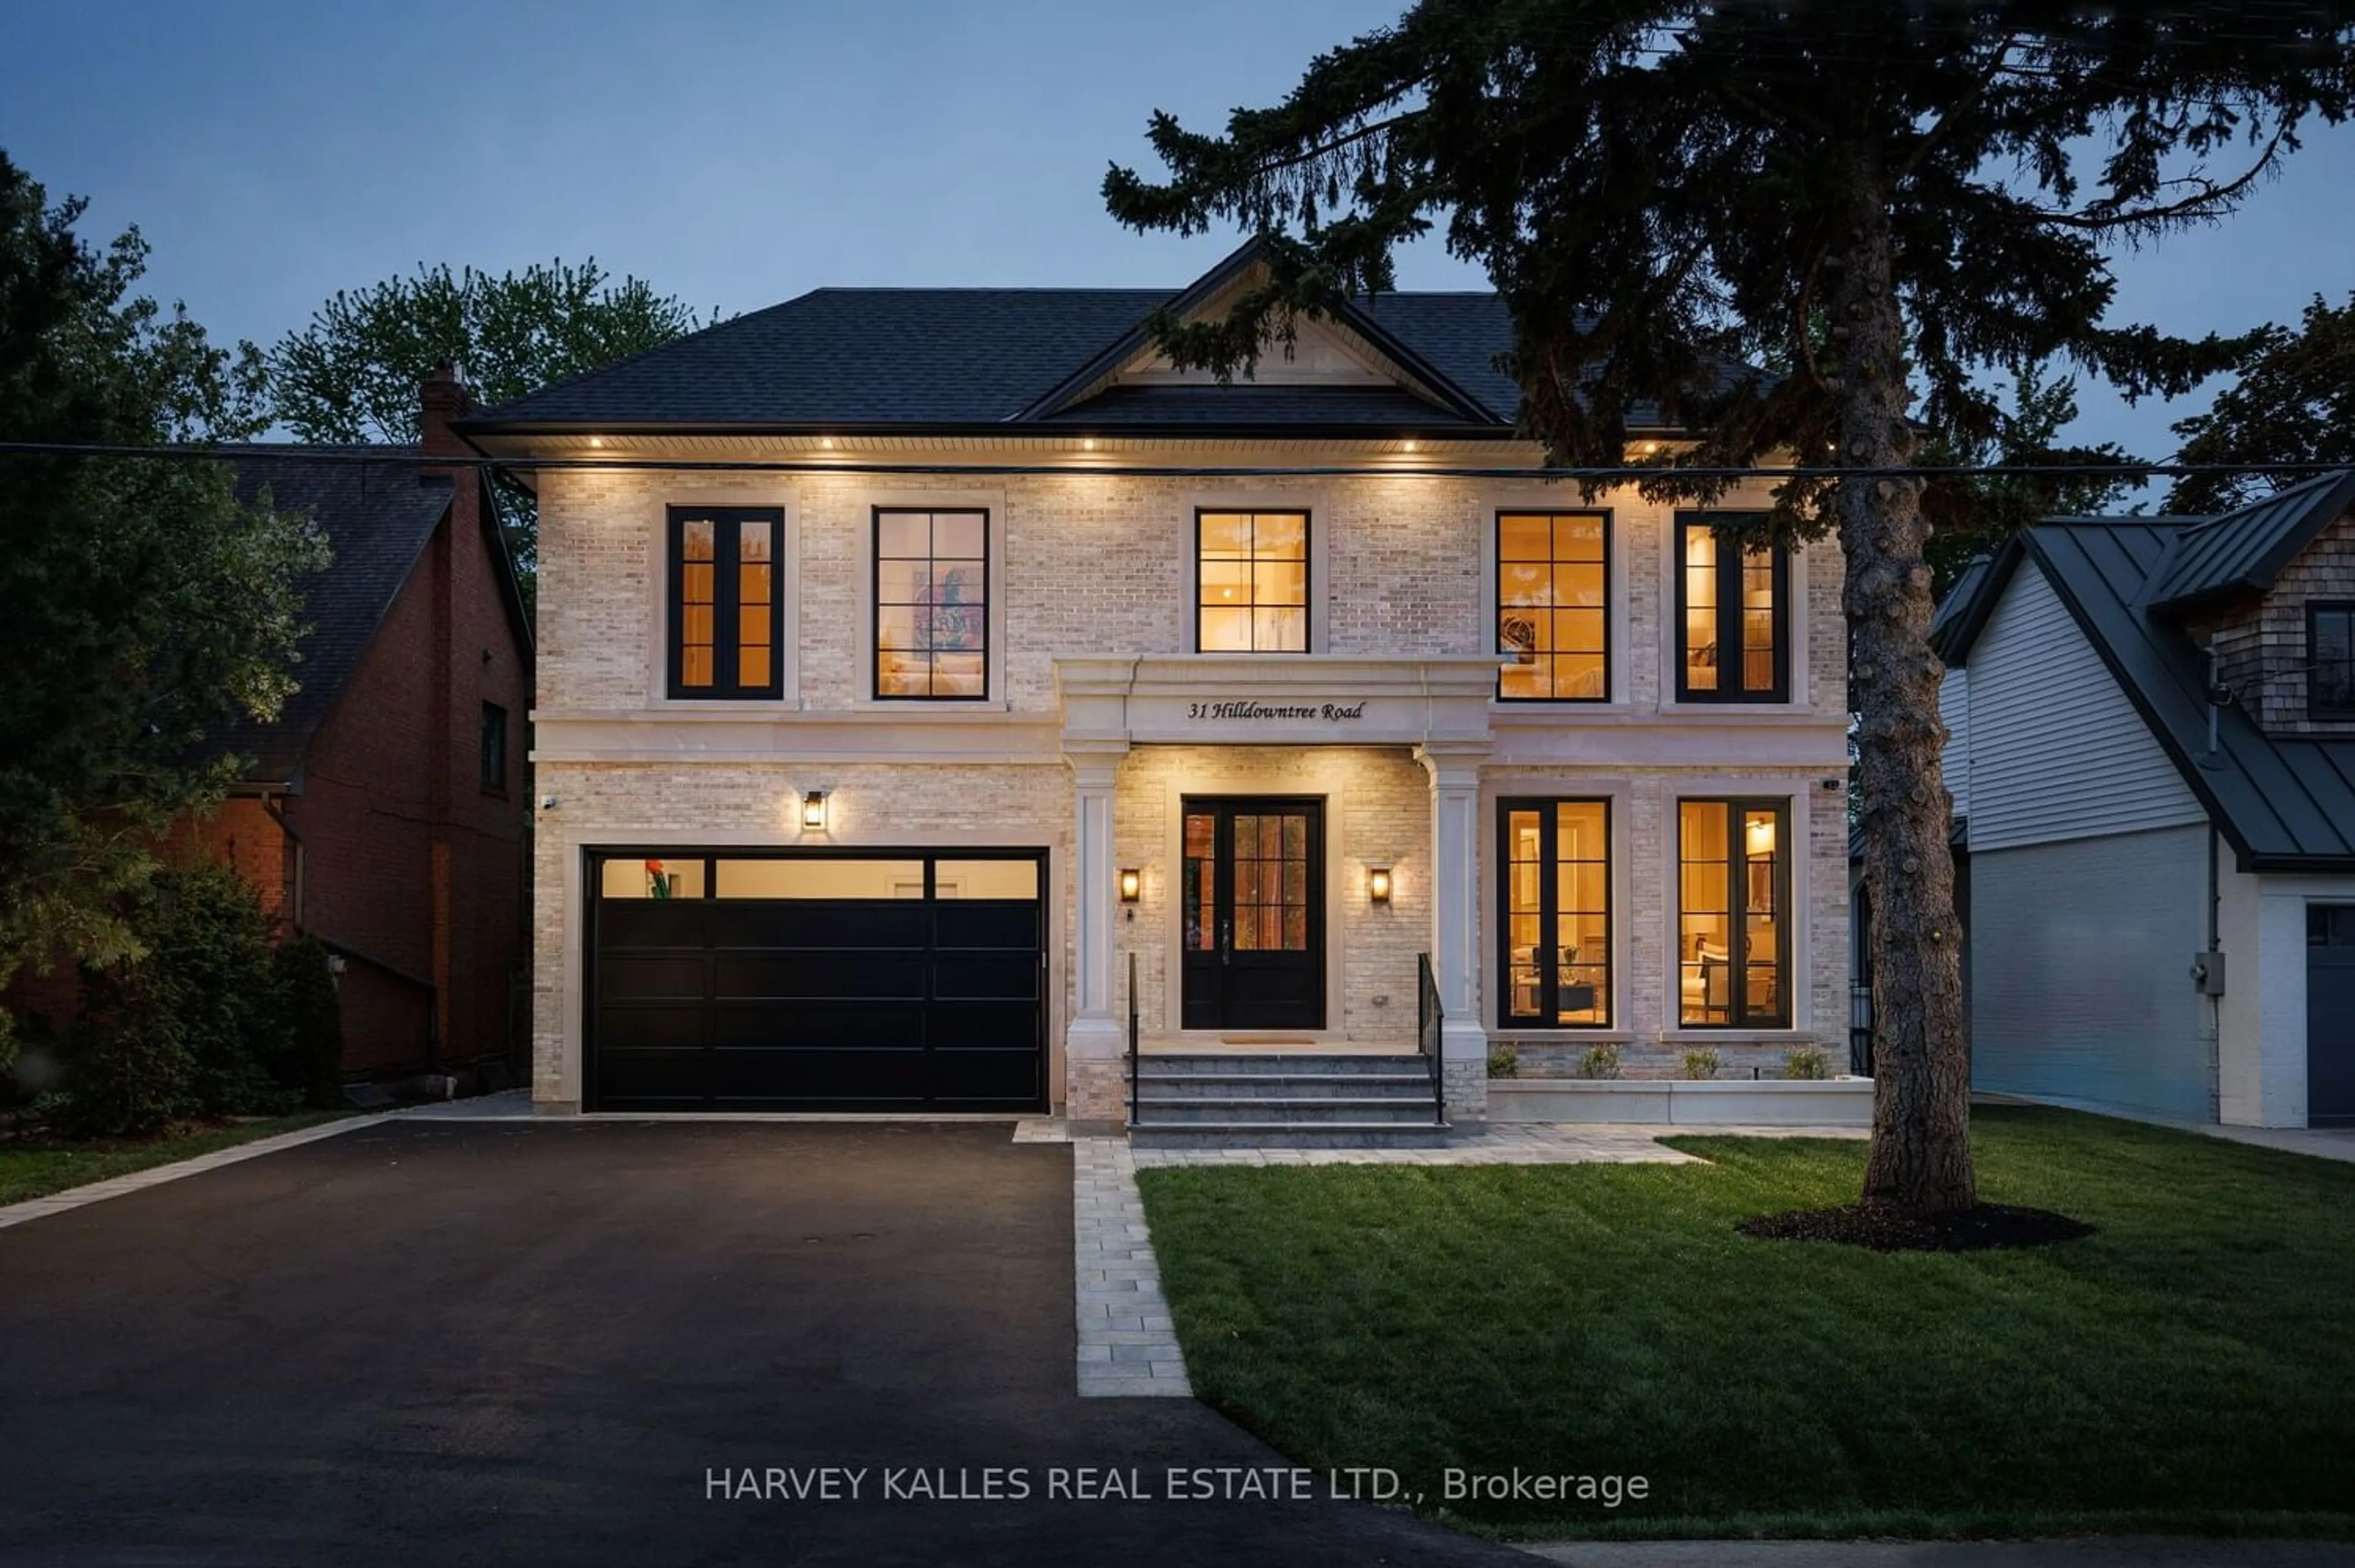 Home with brick exterior material for 31 Hilldowntree Rd, Toronto Ontario M9A 2Z7